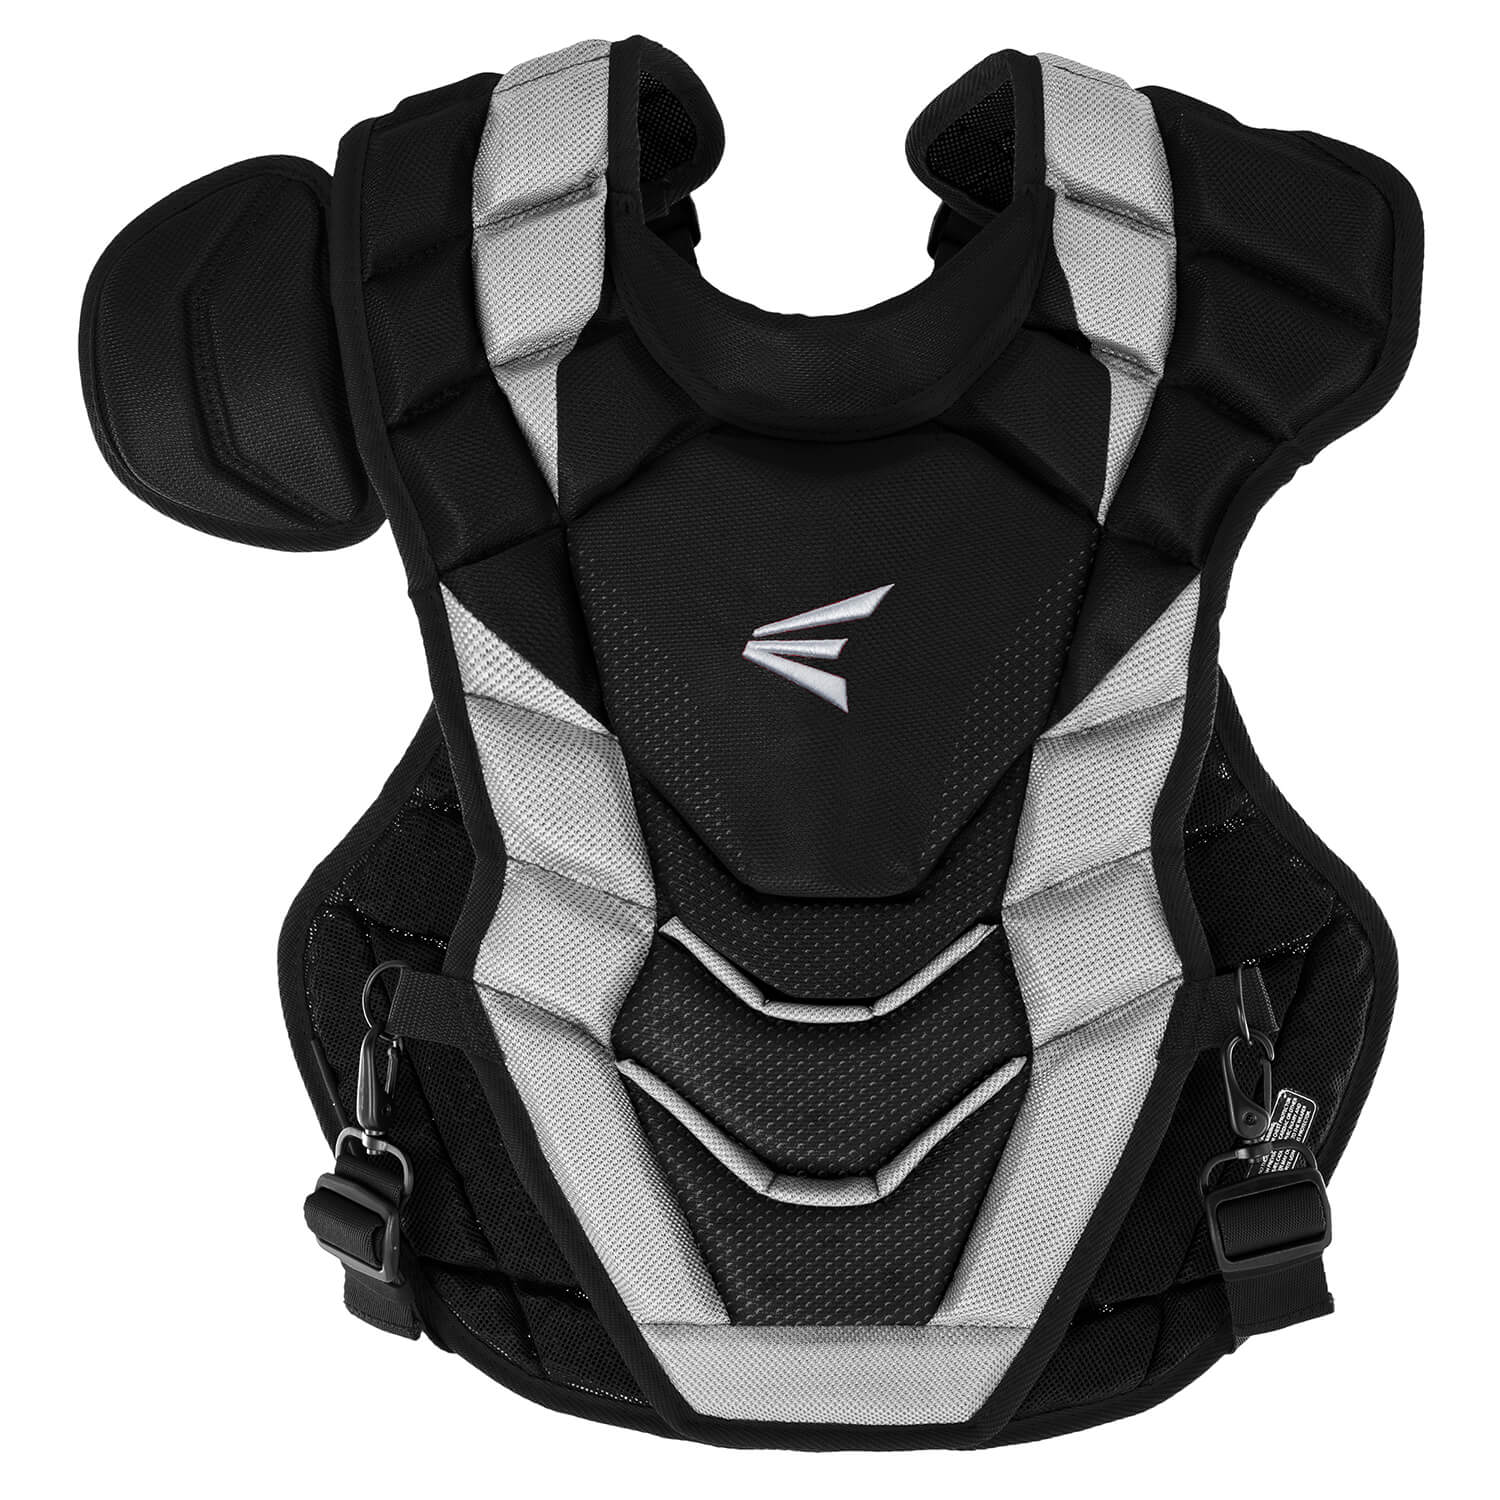 Easton PRO-X Chest Protector - INT